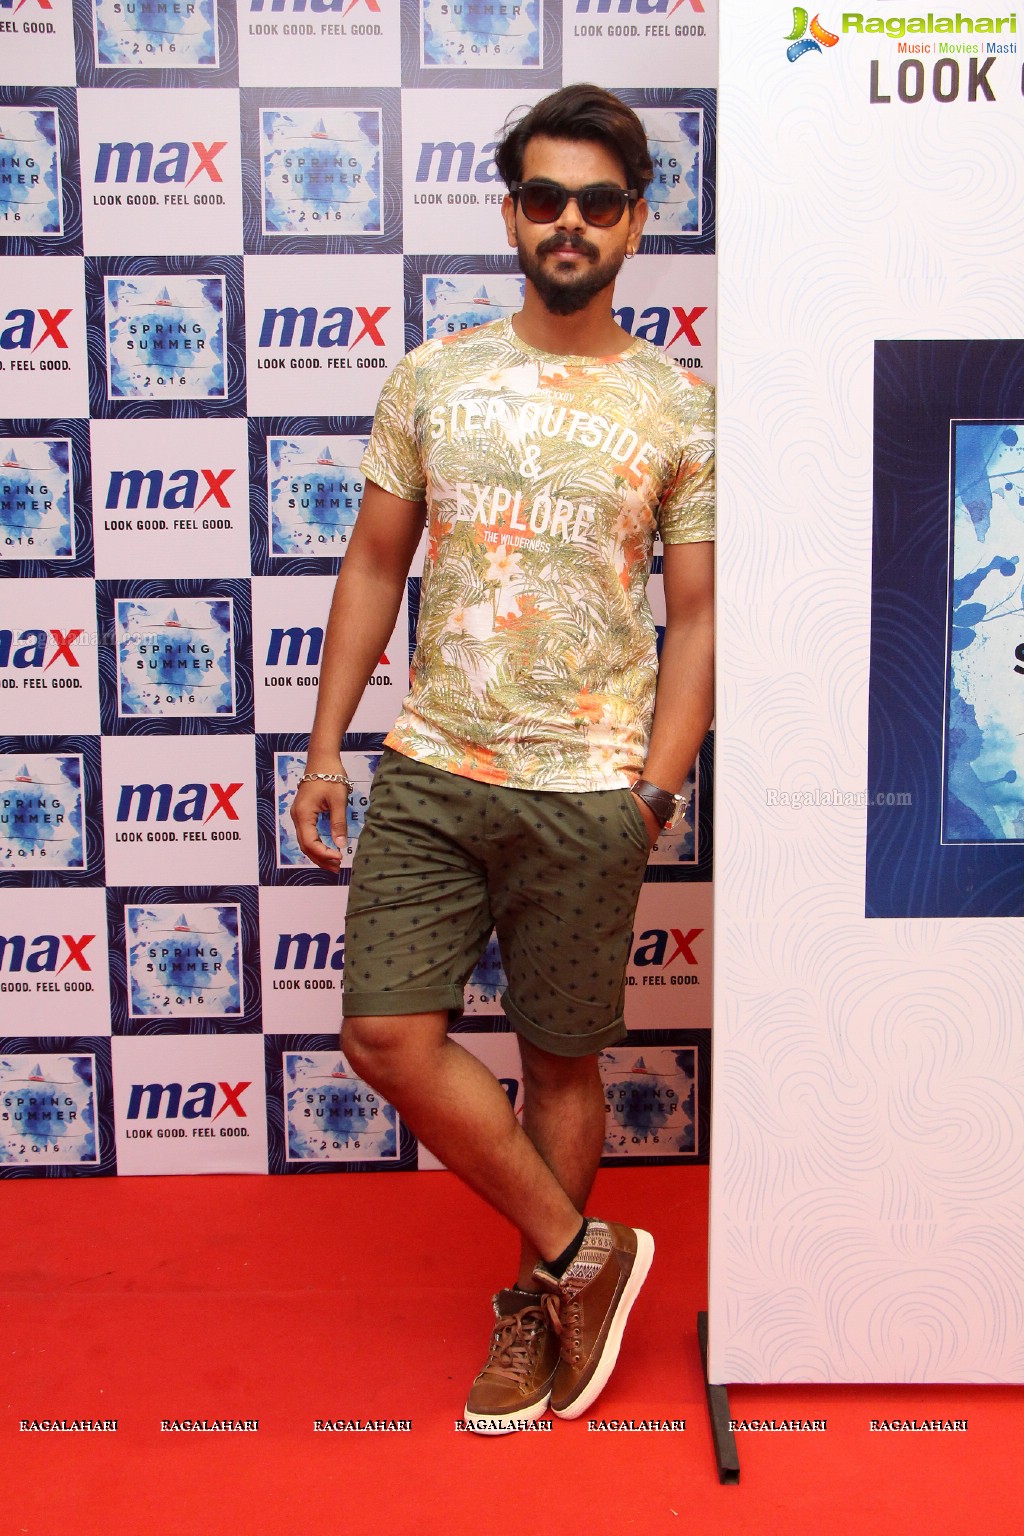 Max Spring and Summer Collection 2016 Launch, Hyderabad